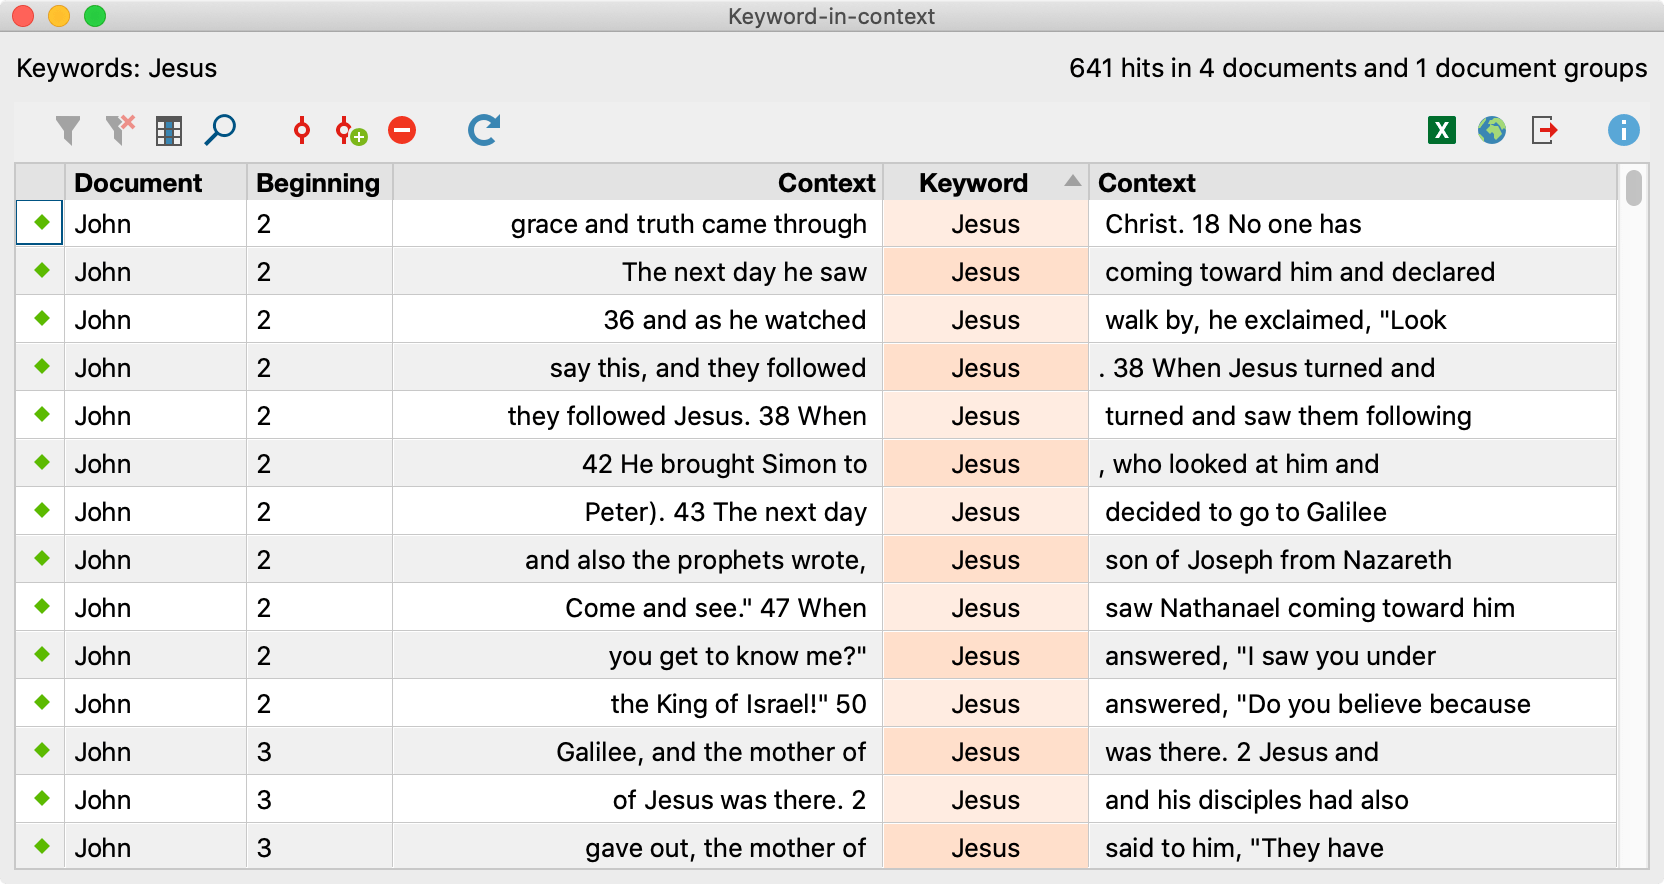 Results table for “Keyword-in-context”